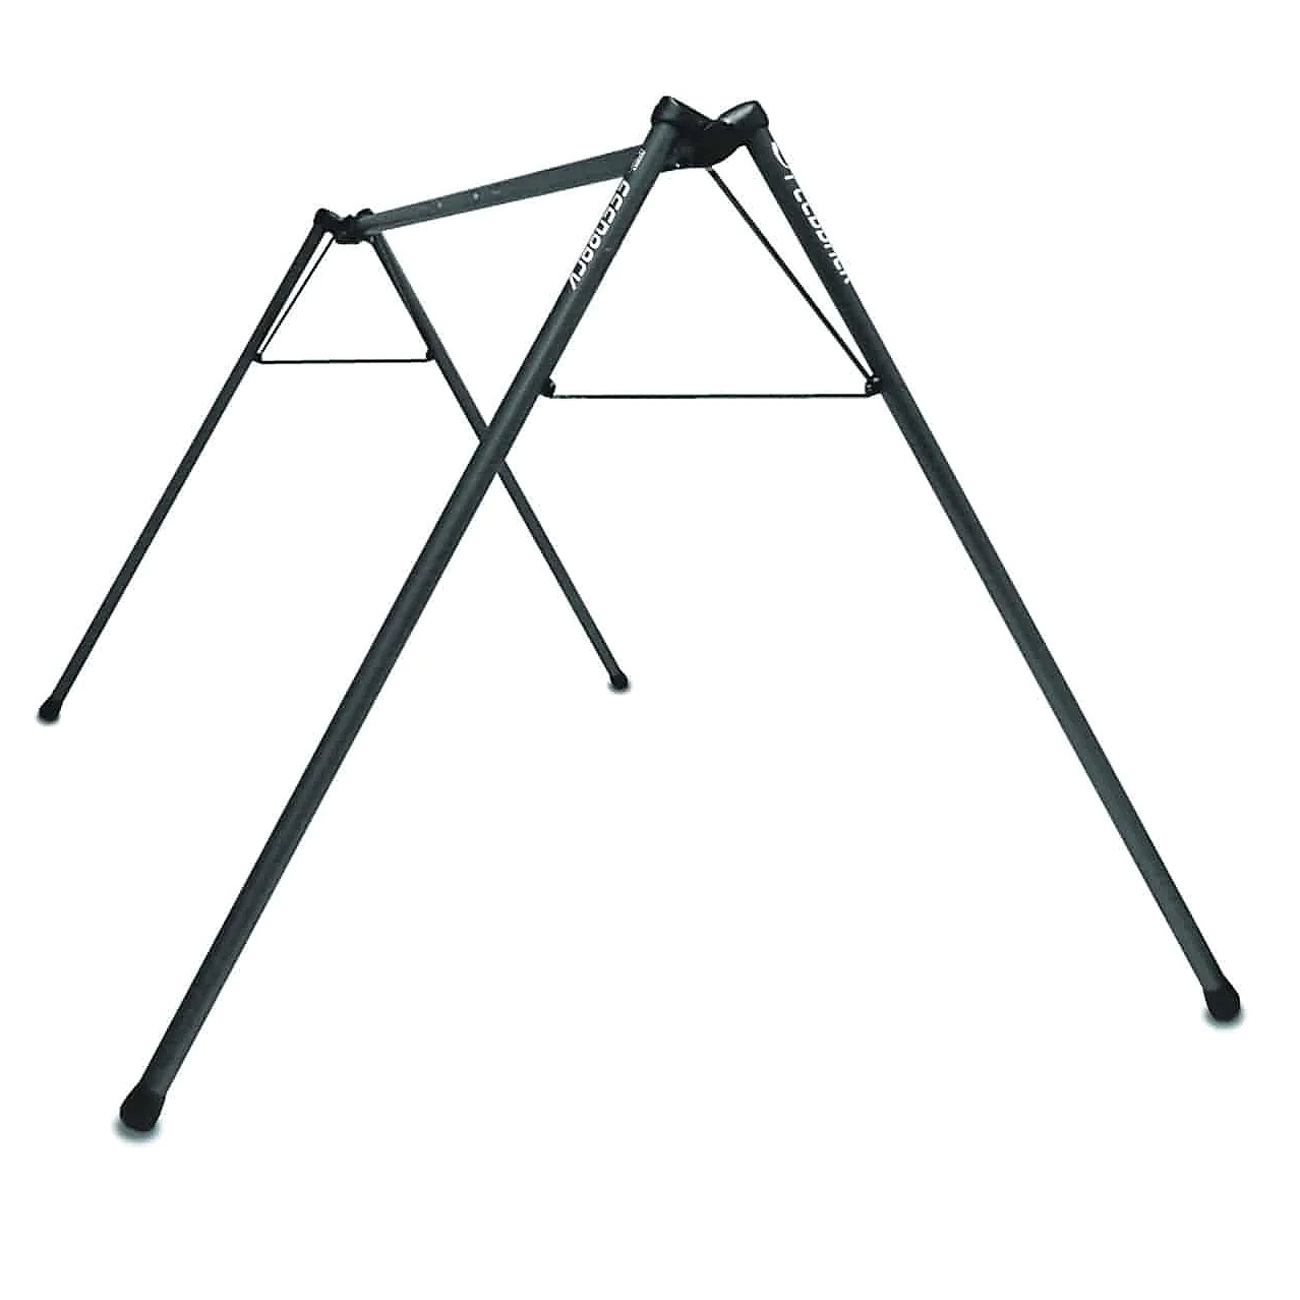 Productfoto van Feedback Sports A-Frame Portable Event Stand - black